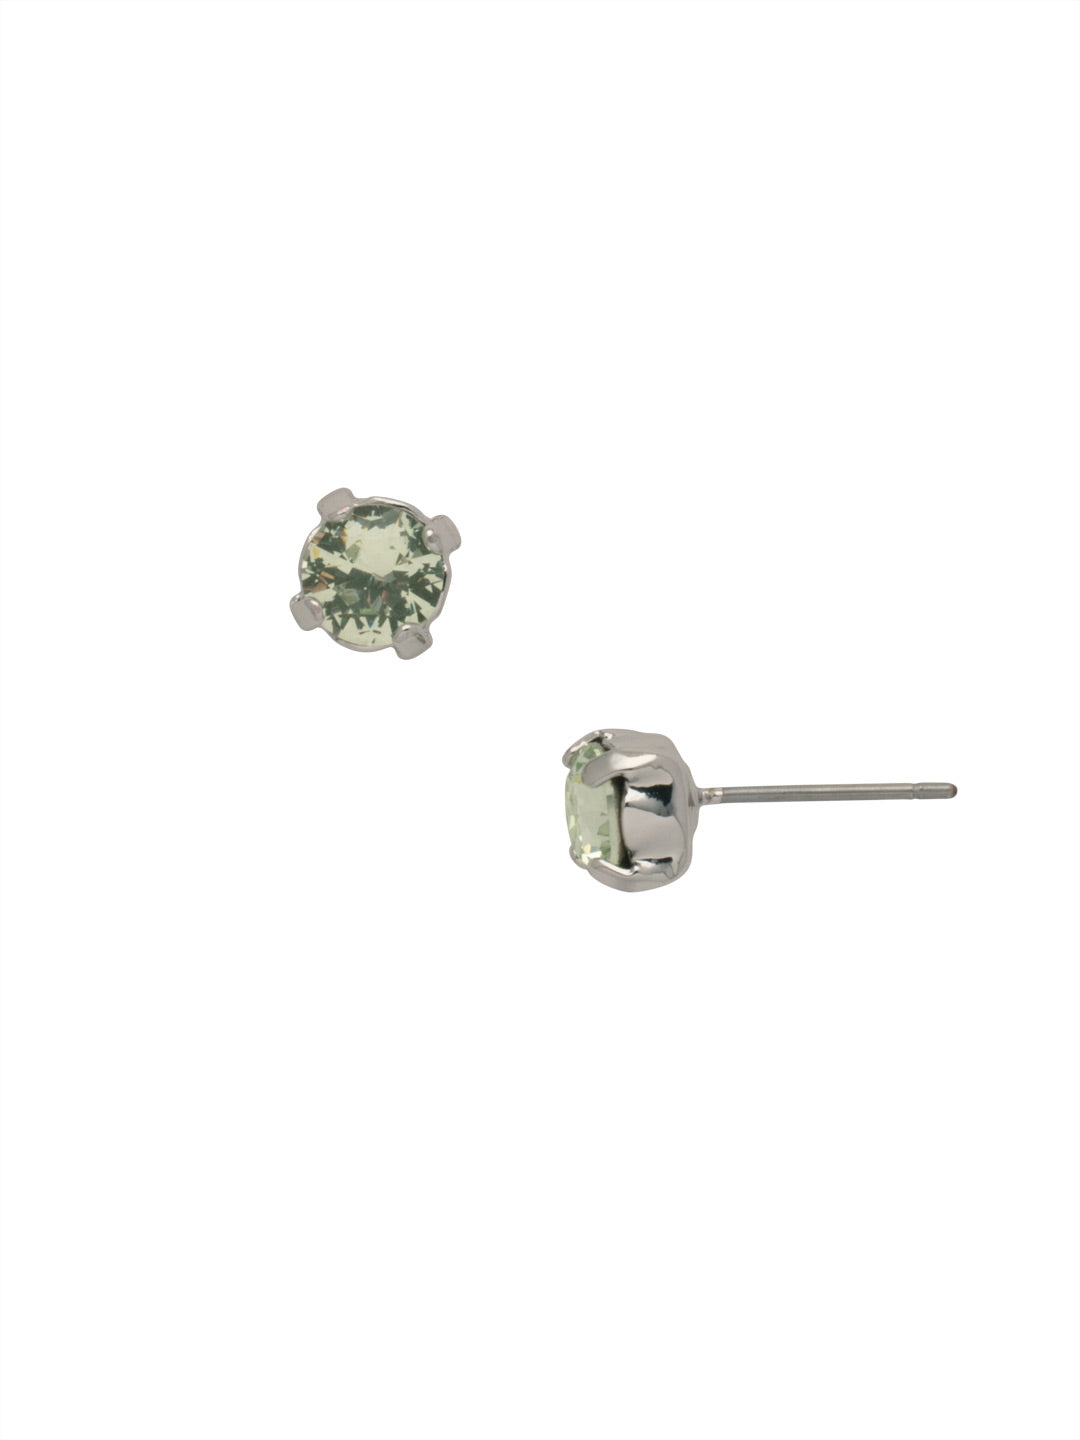 Jayda Stud Earrings - EDN32PDMIN - <p>The Jayda Stud Earrings are the perfect every day wardrobe staple. A round crystal nestles perfectly in a metal plated post with four prongs. </p><p>Need help picking a stud? <a href="https://www.sorrelli.com/blogs/sisterhood/round-stud-earrings-101-a-rundown-of-sizes-styles-and-sparkle">Check out our size guide!</a> From Sorrelli's Mint collection in our Palladium finish.</p>